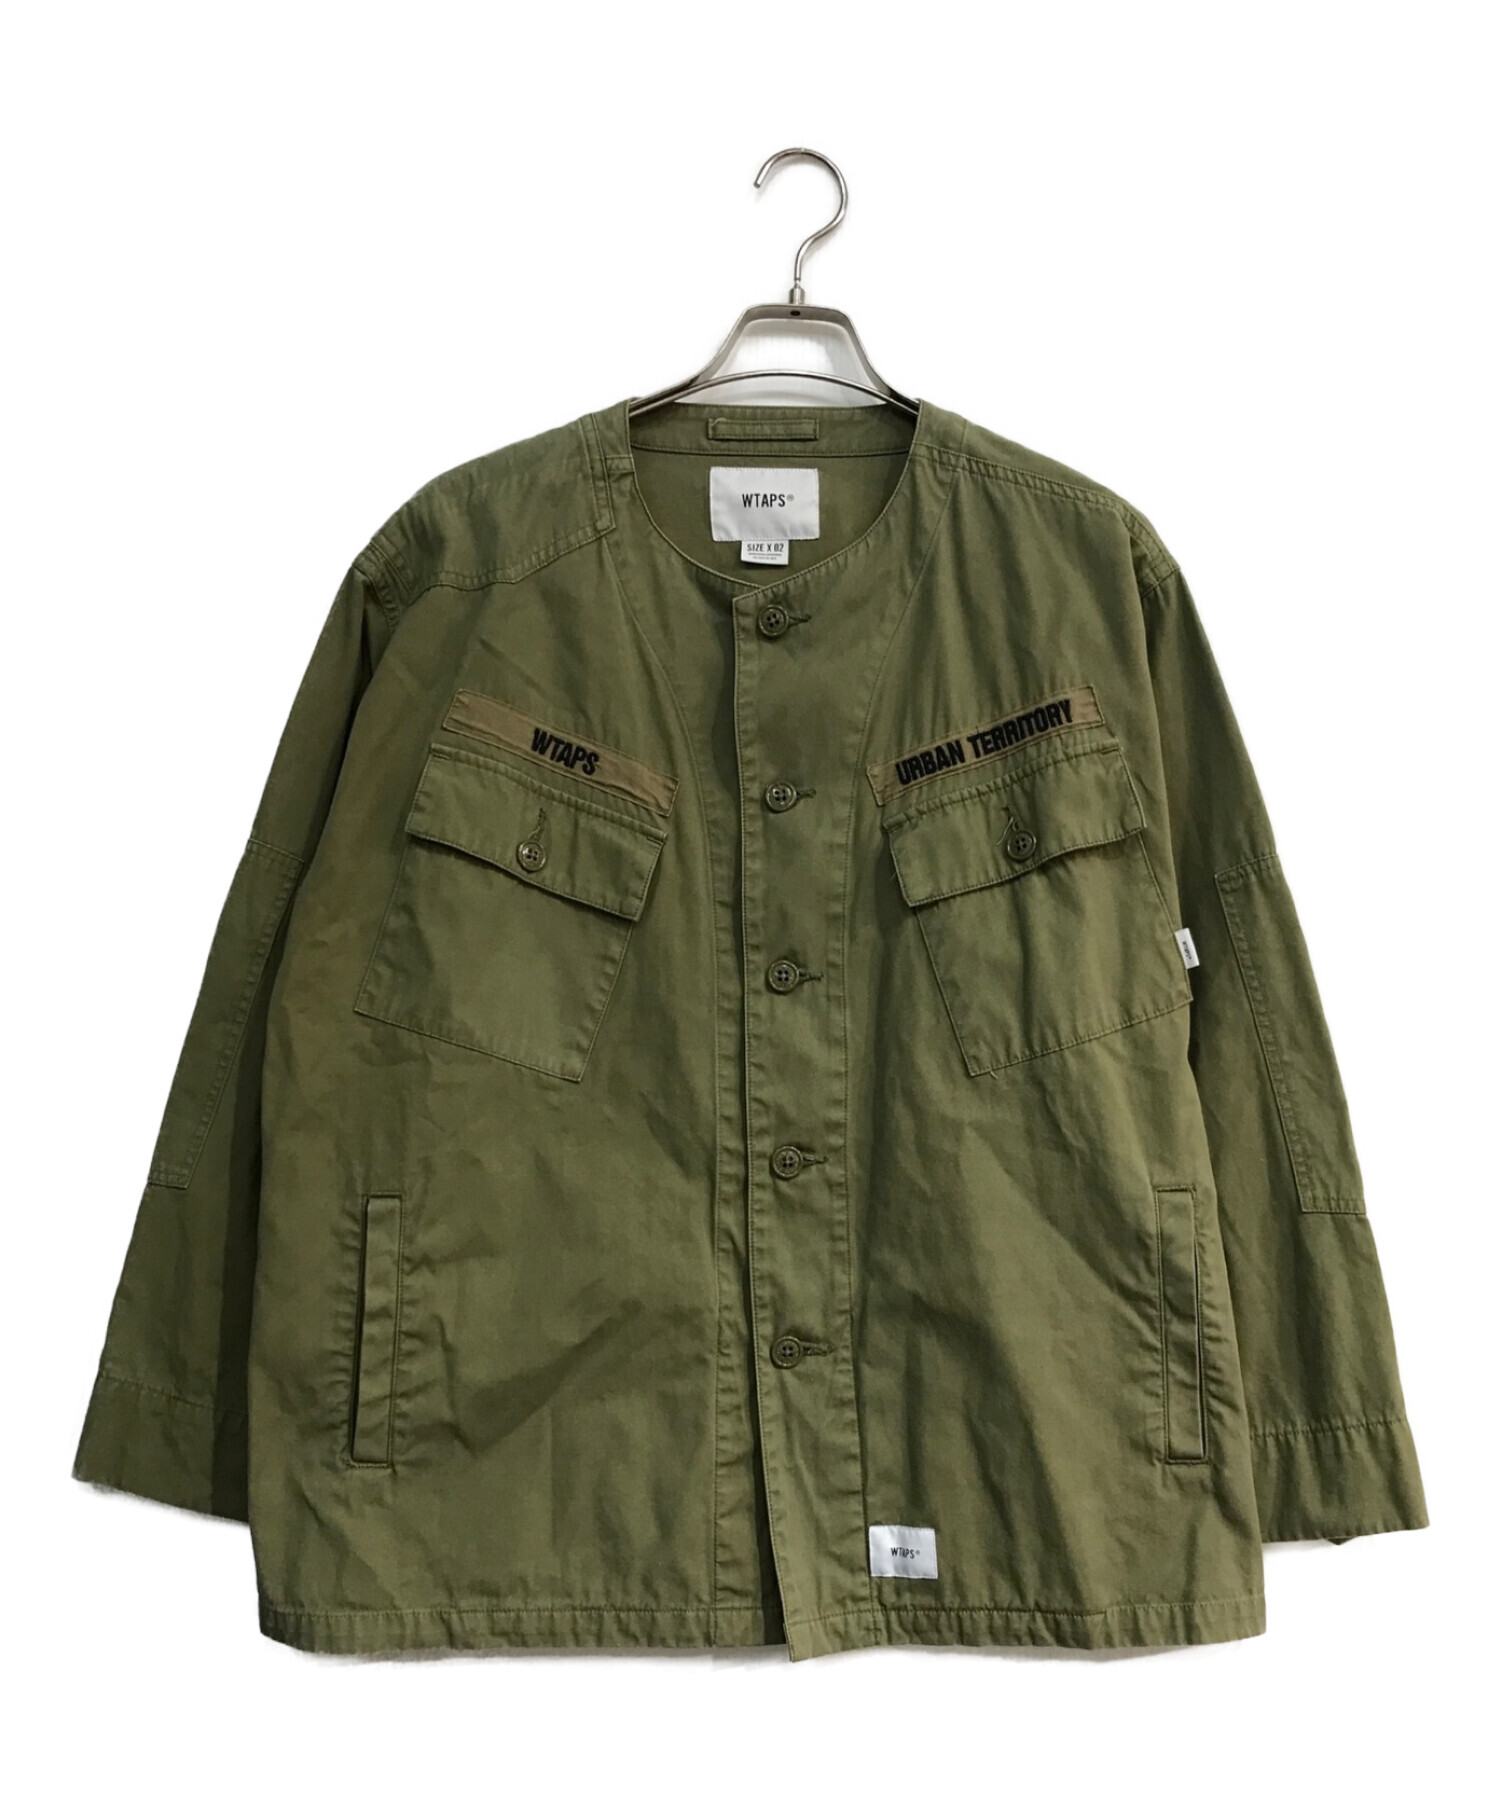 wtaps scout